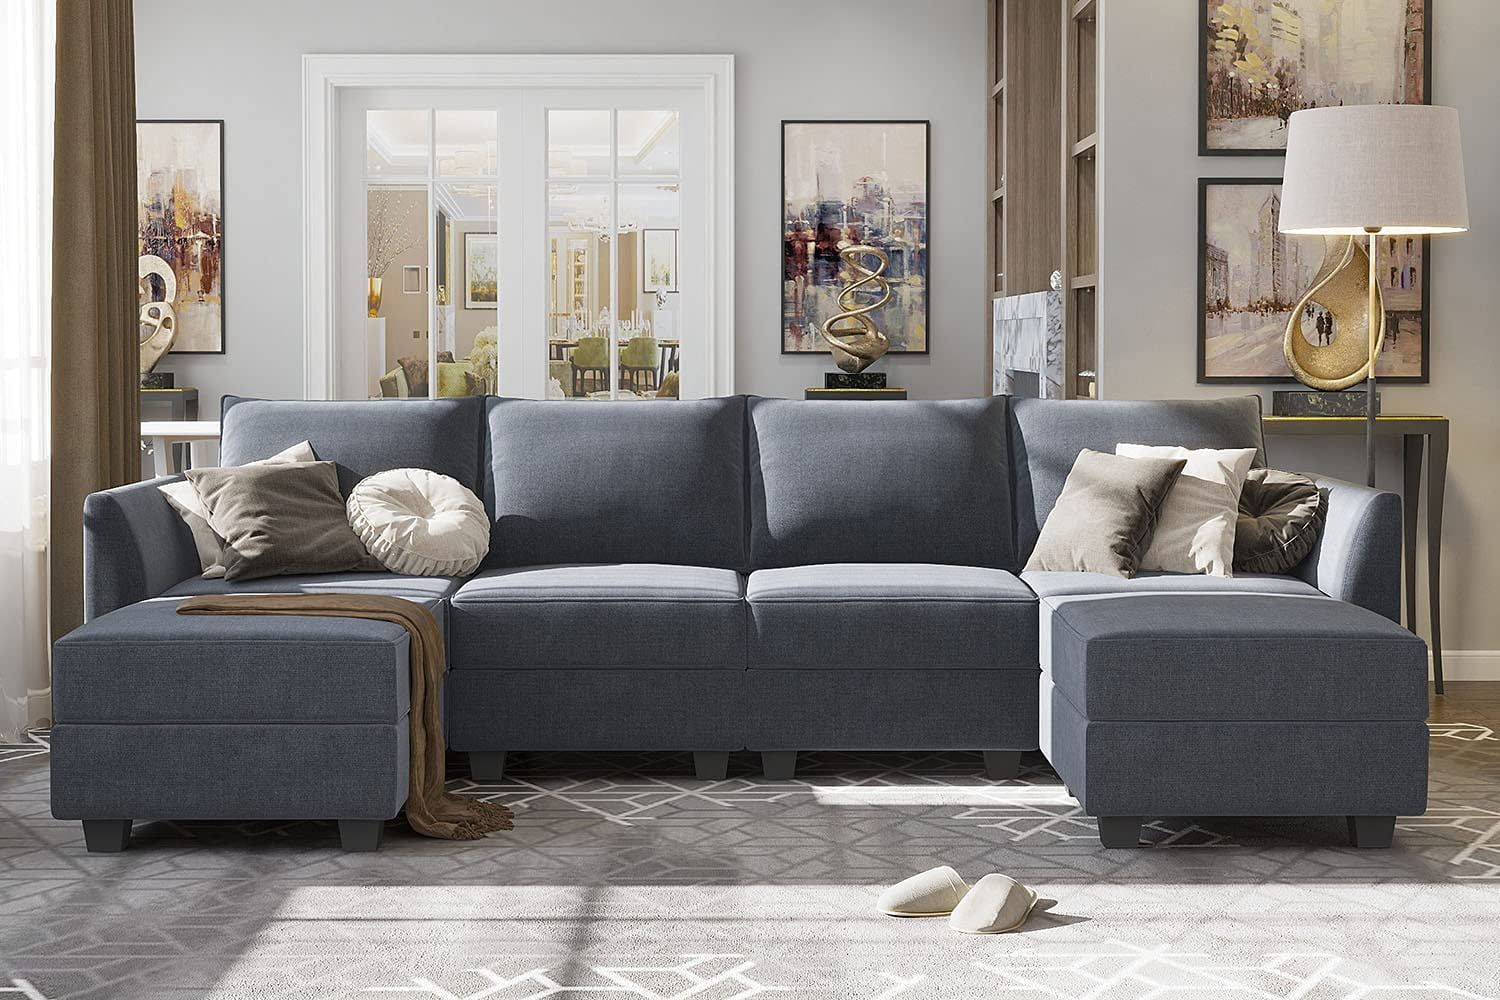 Honbay Sectional Couch With Reversible Chaise Modern L Shape Sofa 4 For Sofas In Bluish Grey (View 6 of 20)